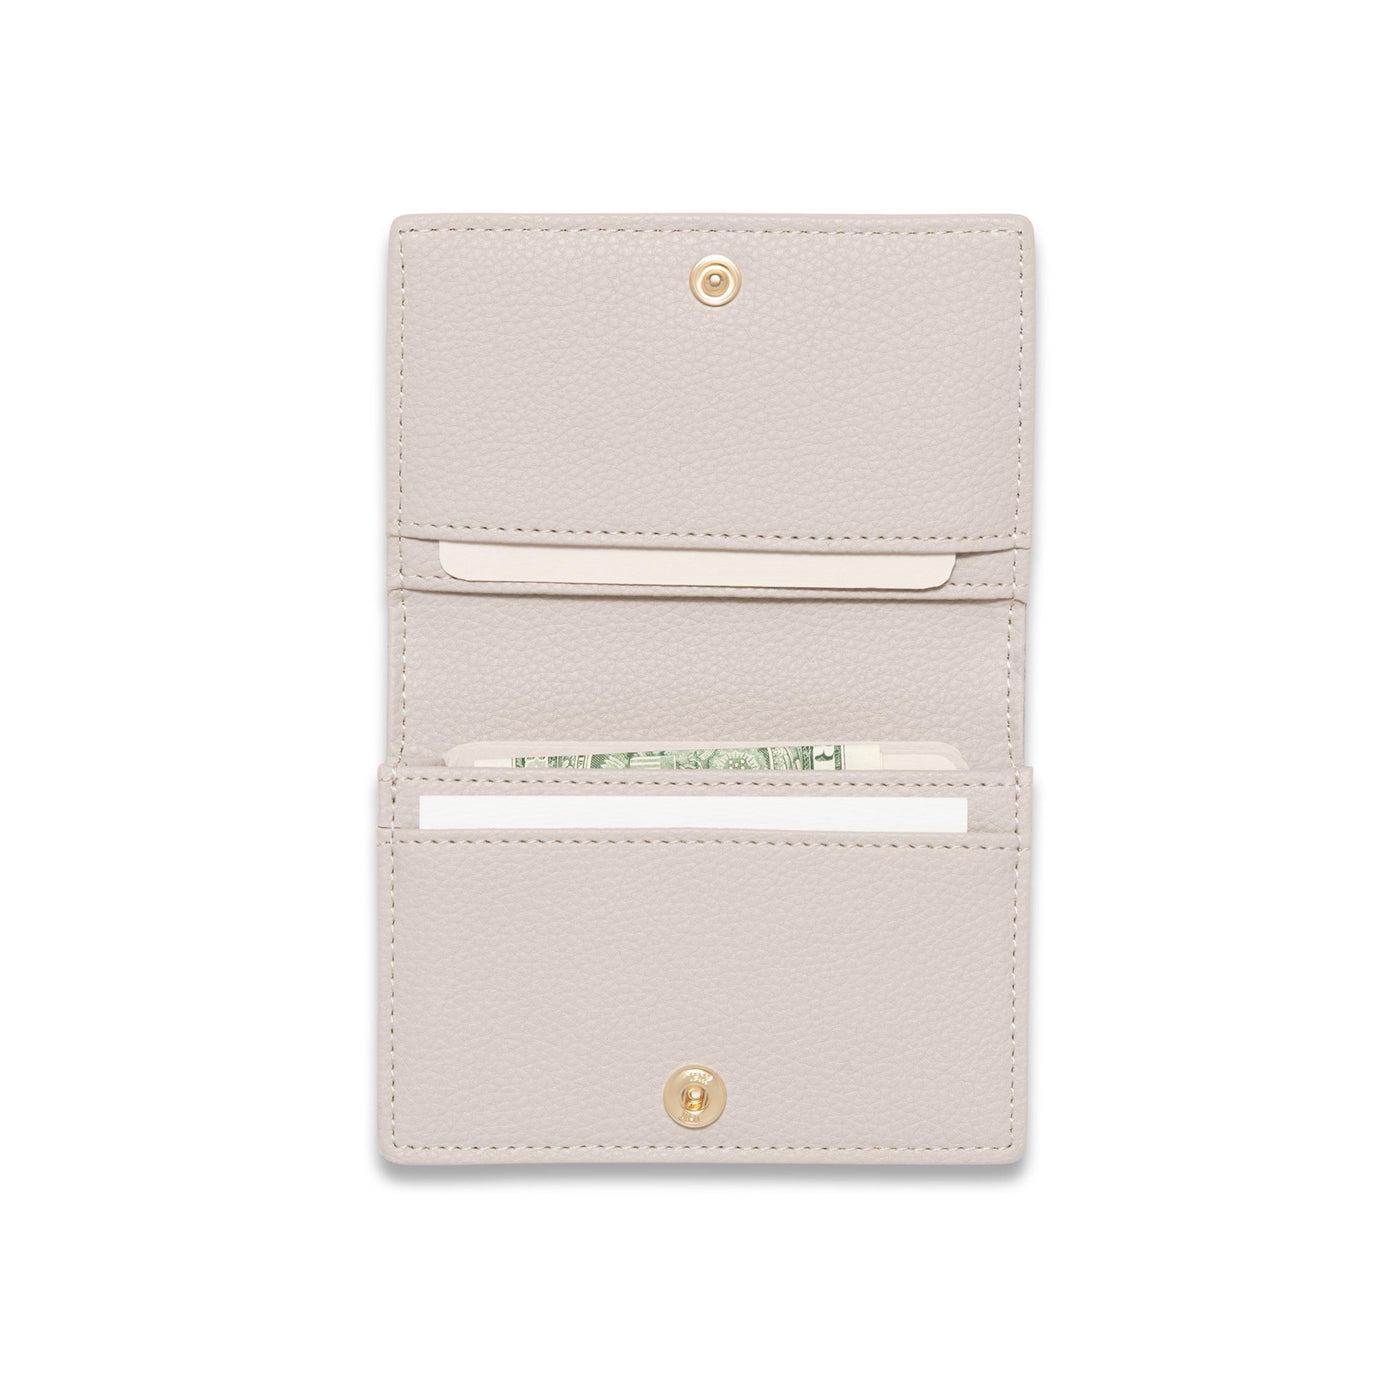 Lark and Ives / Vegan Leather Accessories / Small Accessories / Wallet / Mini Wallet / Card Case / Card Holder / Button snap closure / Fold Wallet / Light Beige Card Case with money and cards